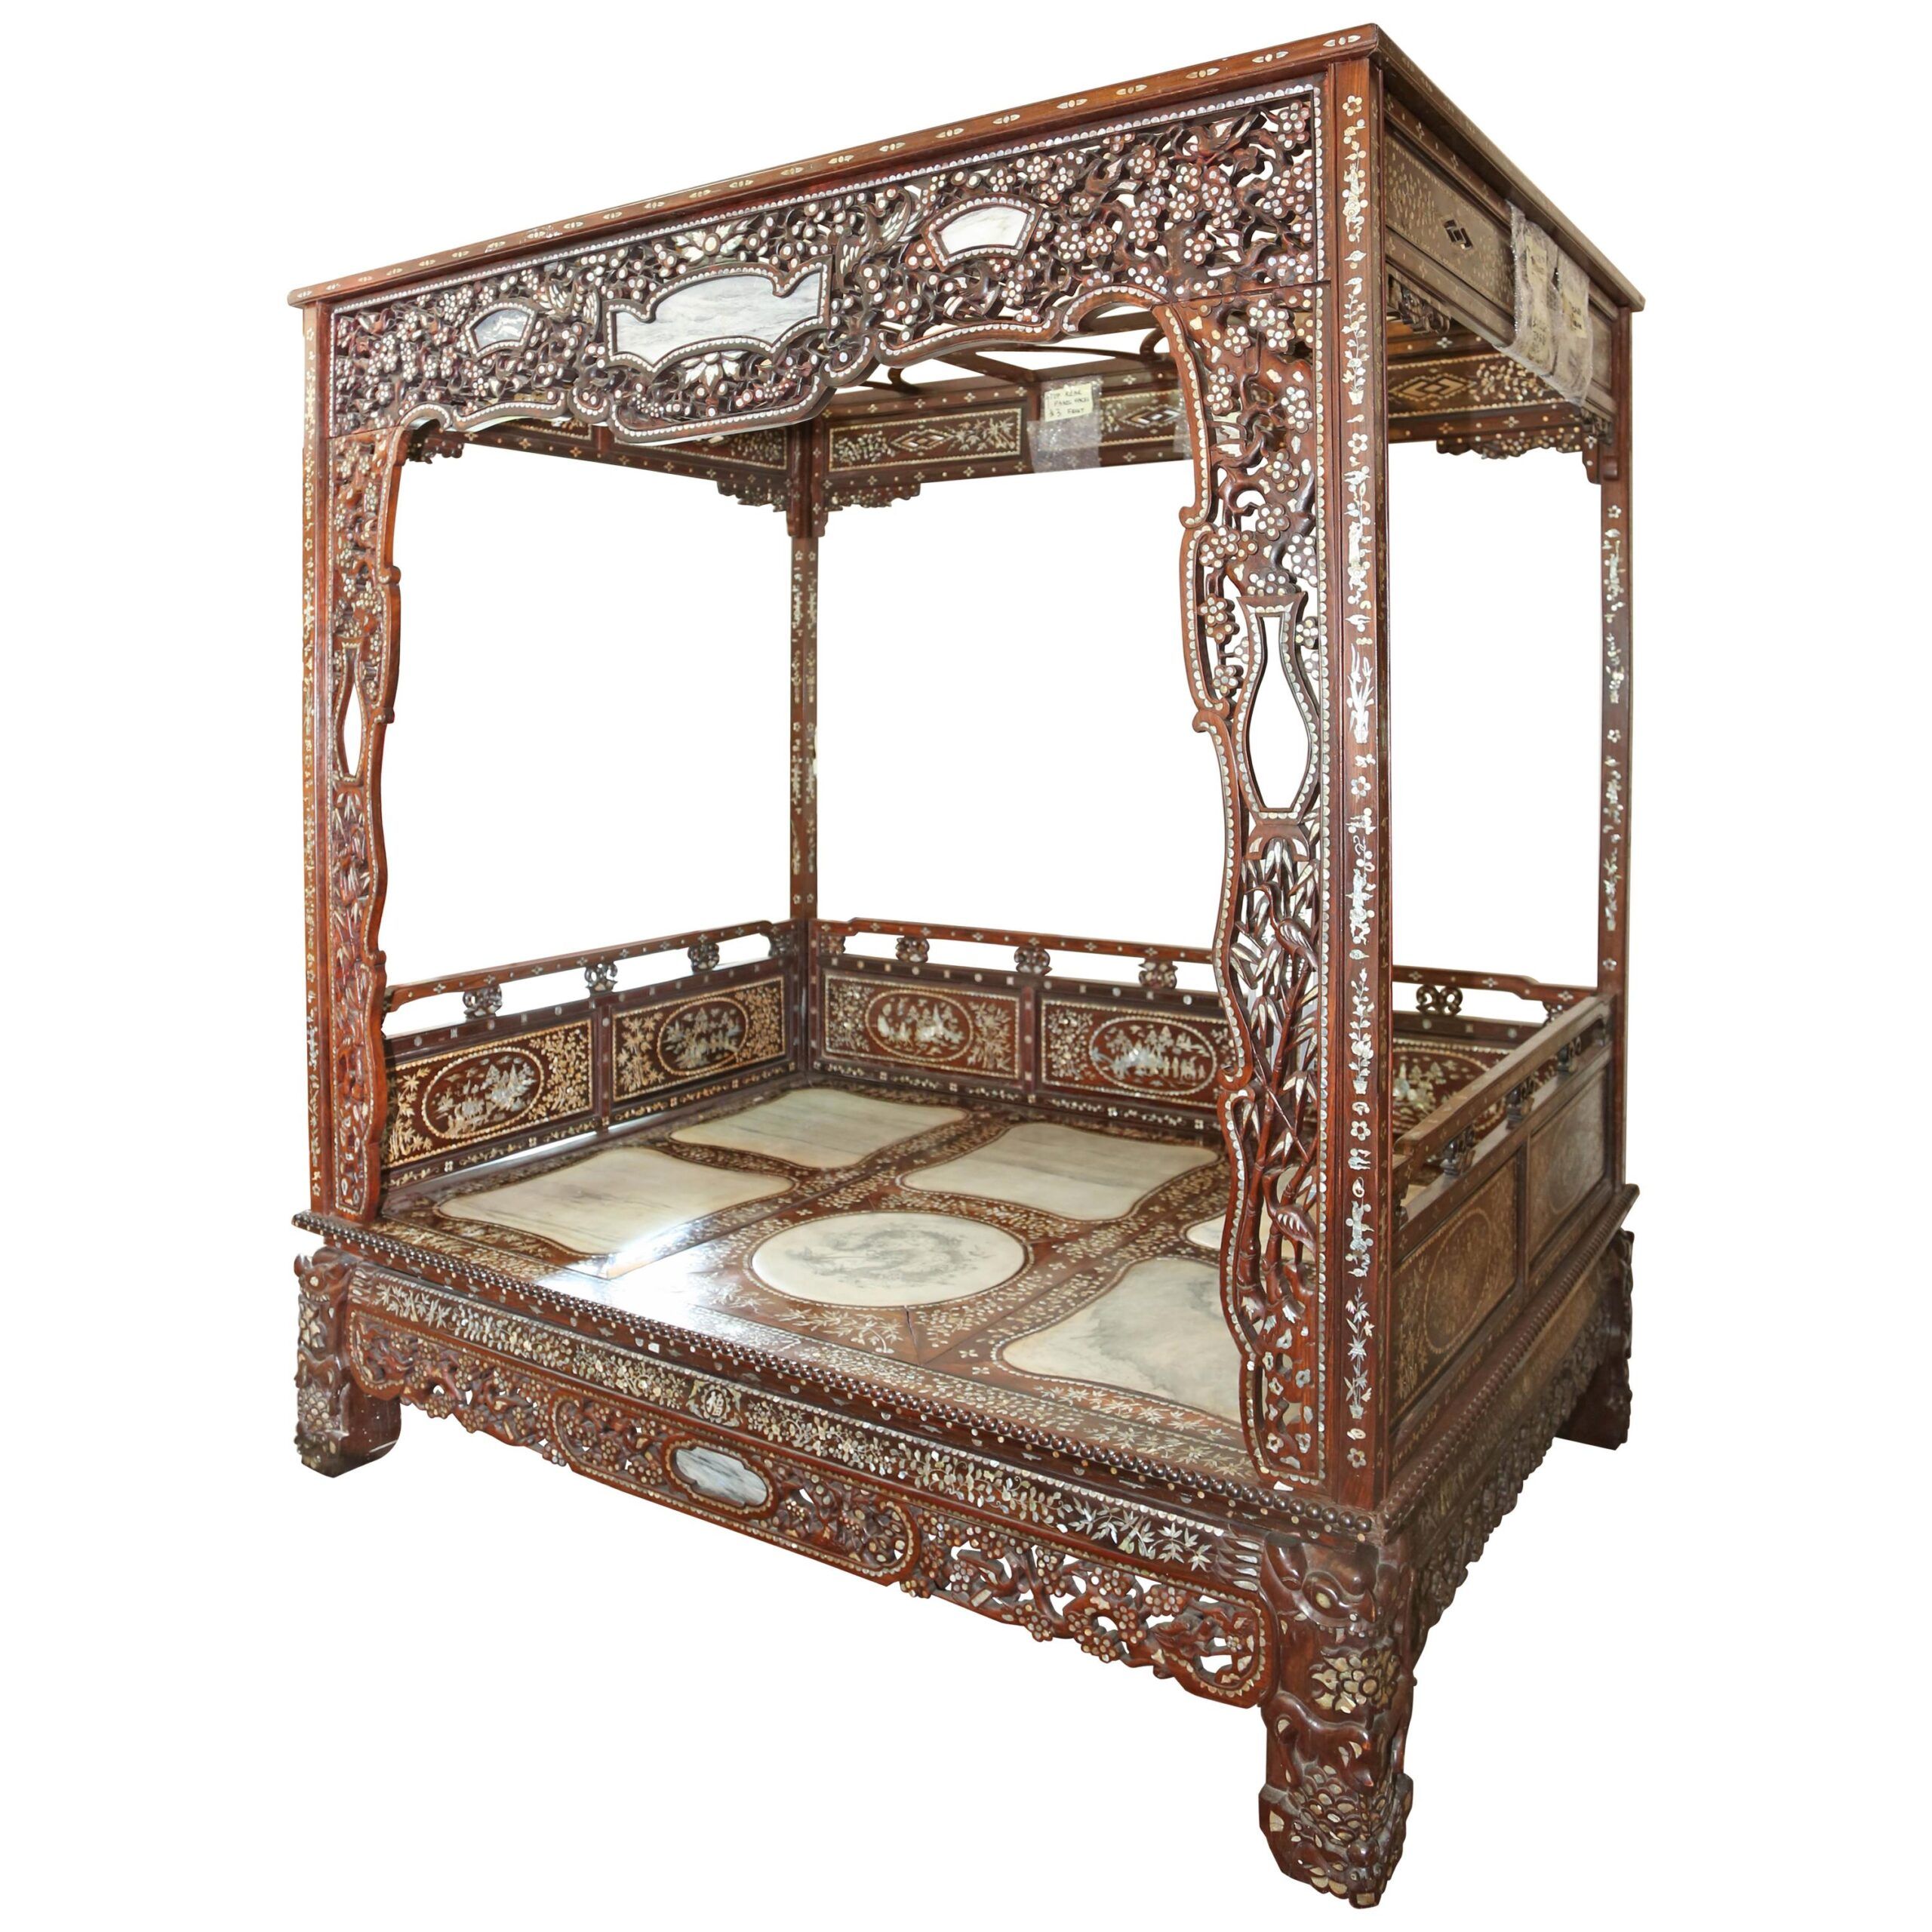 The Intricate Beauty of 19th Century Chinese Wedding Beds: A Symbol of Tradition and Union